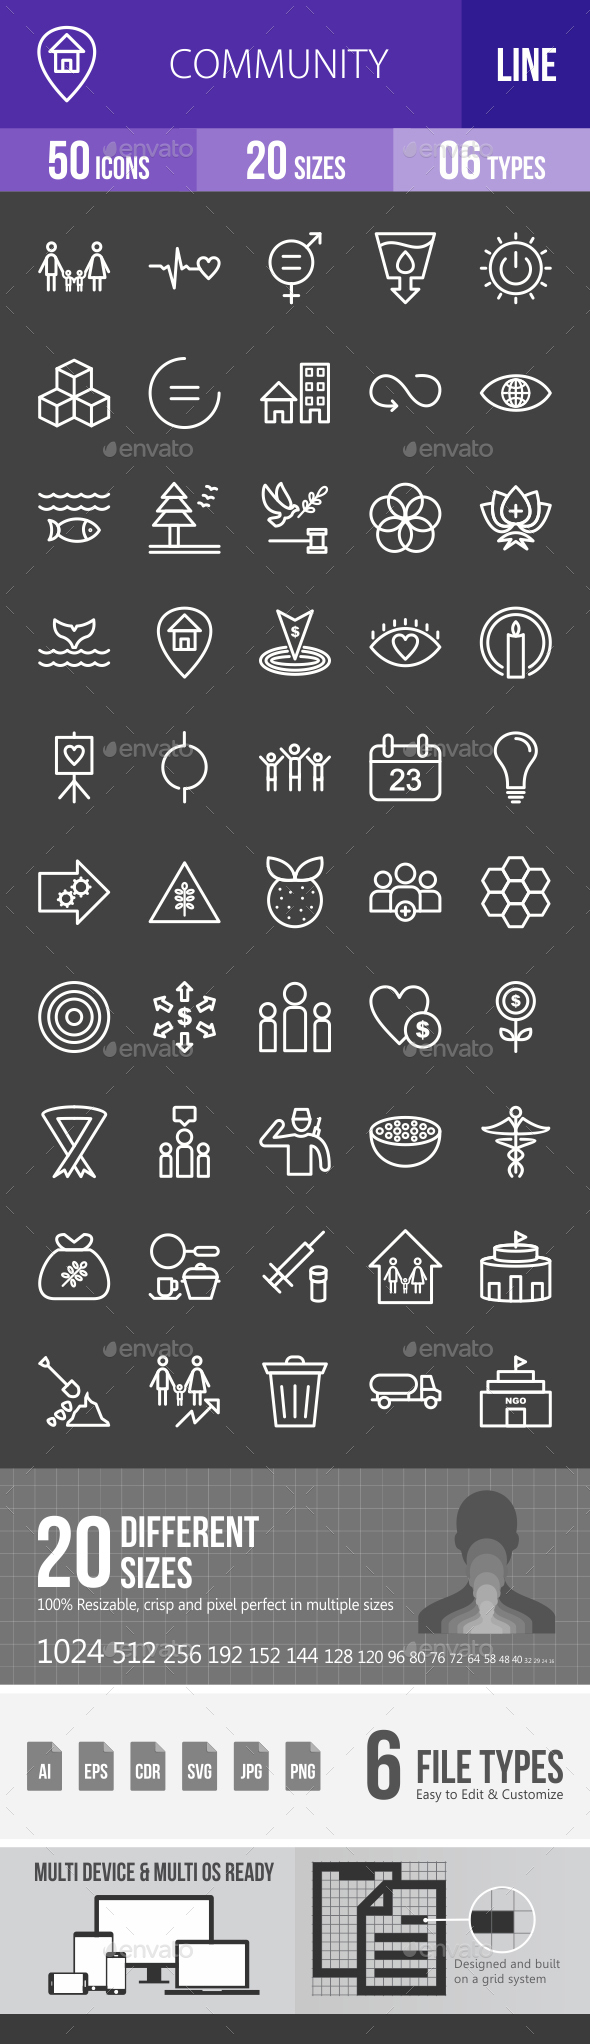 Community Line Inverted Icons